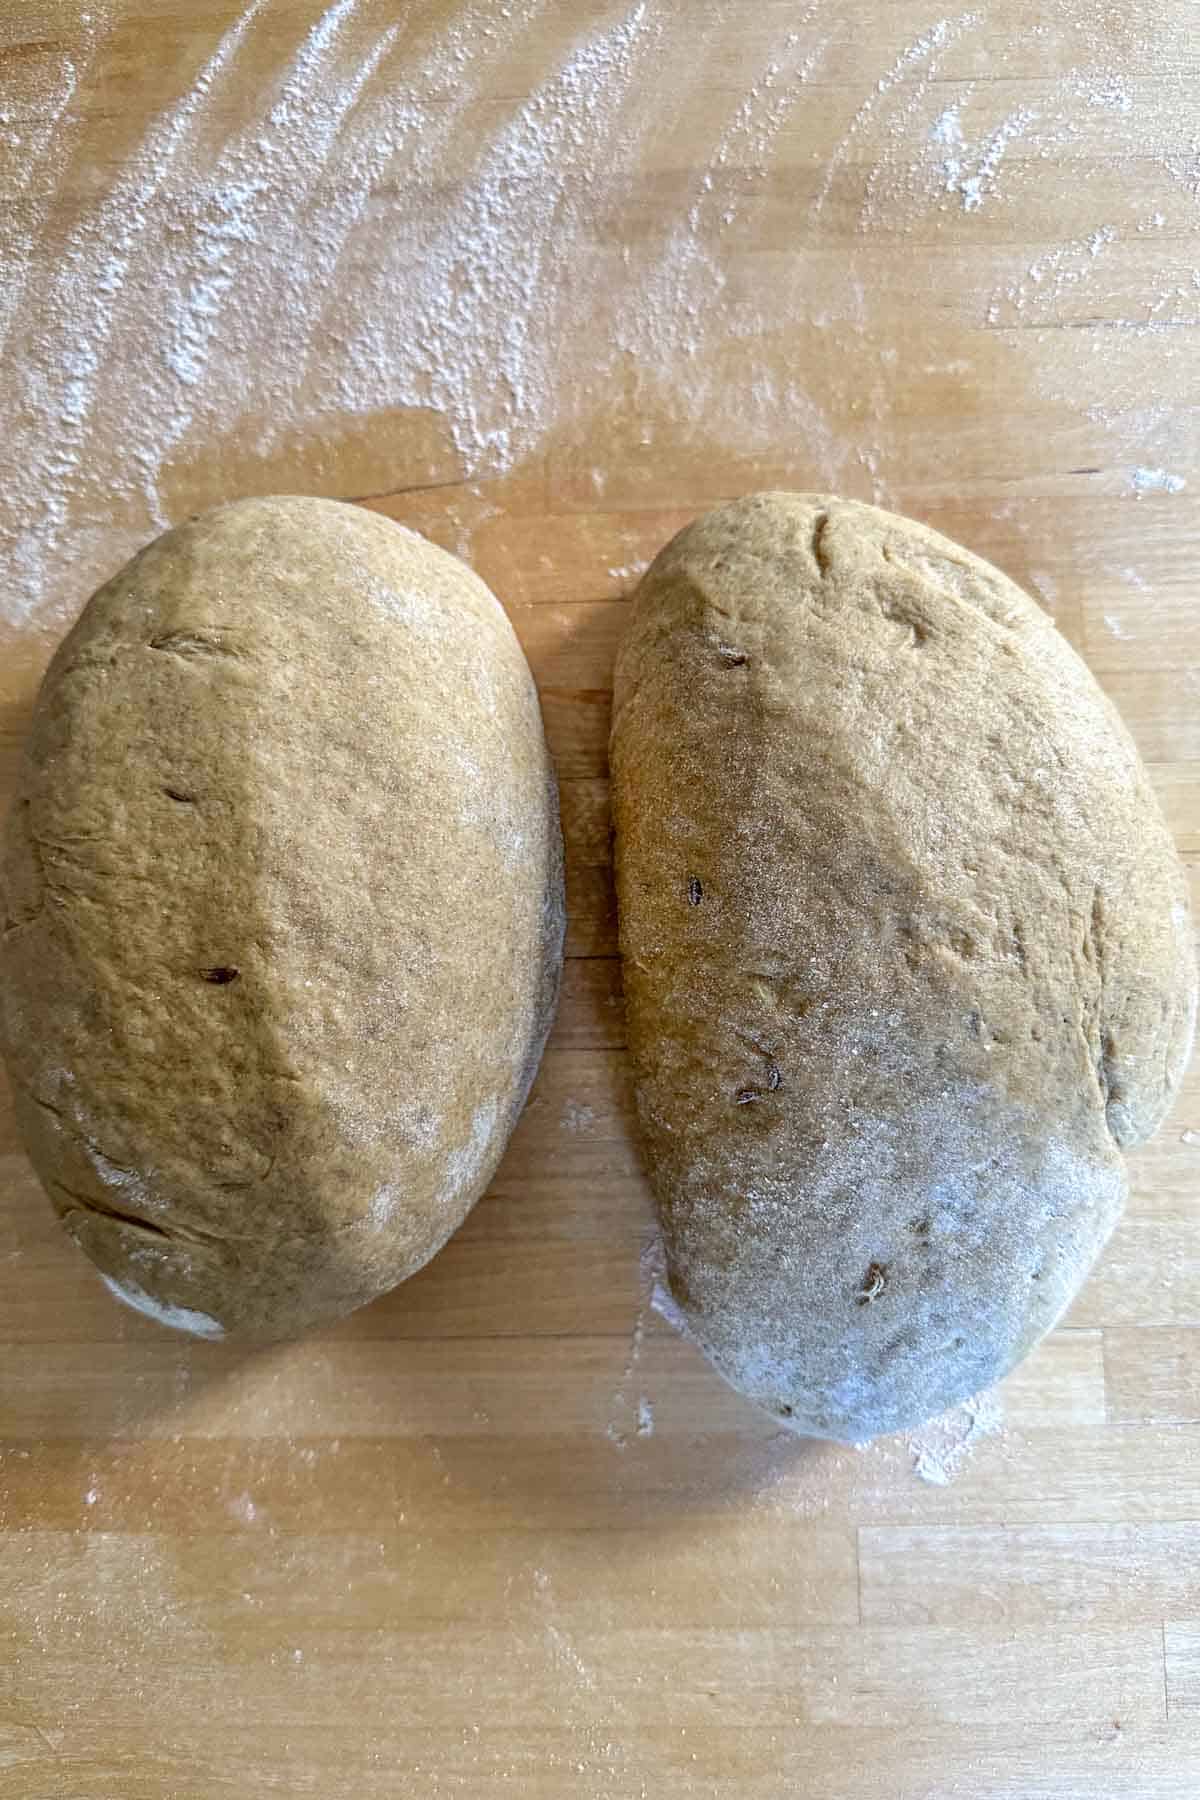 Limpa dough divided in half on a wooden surface.